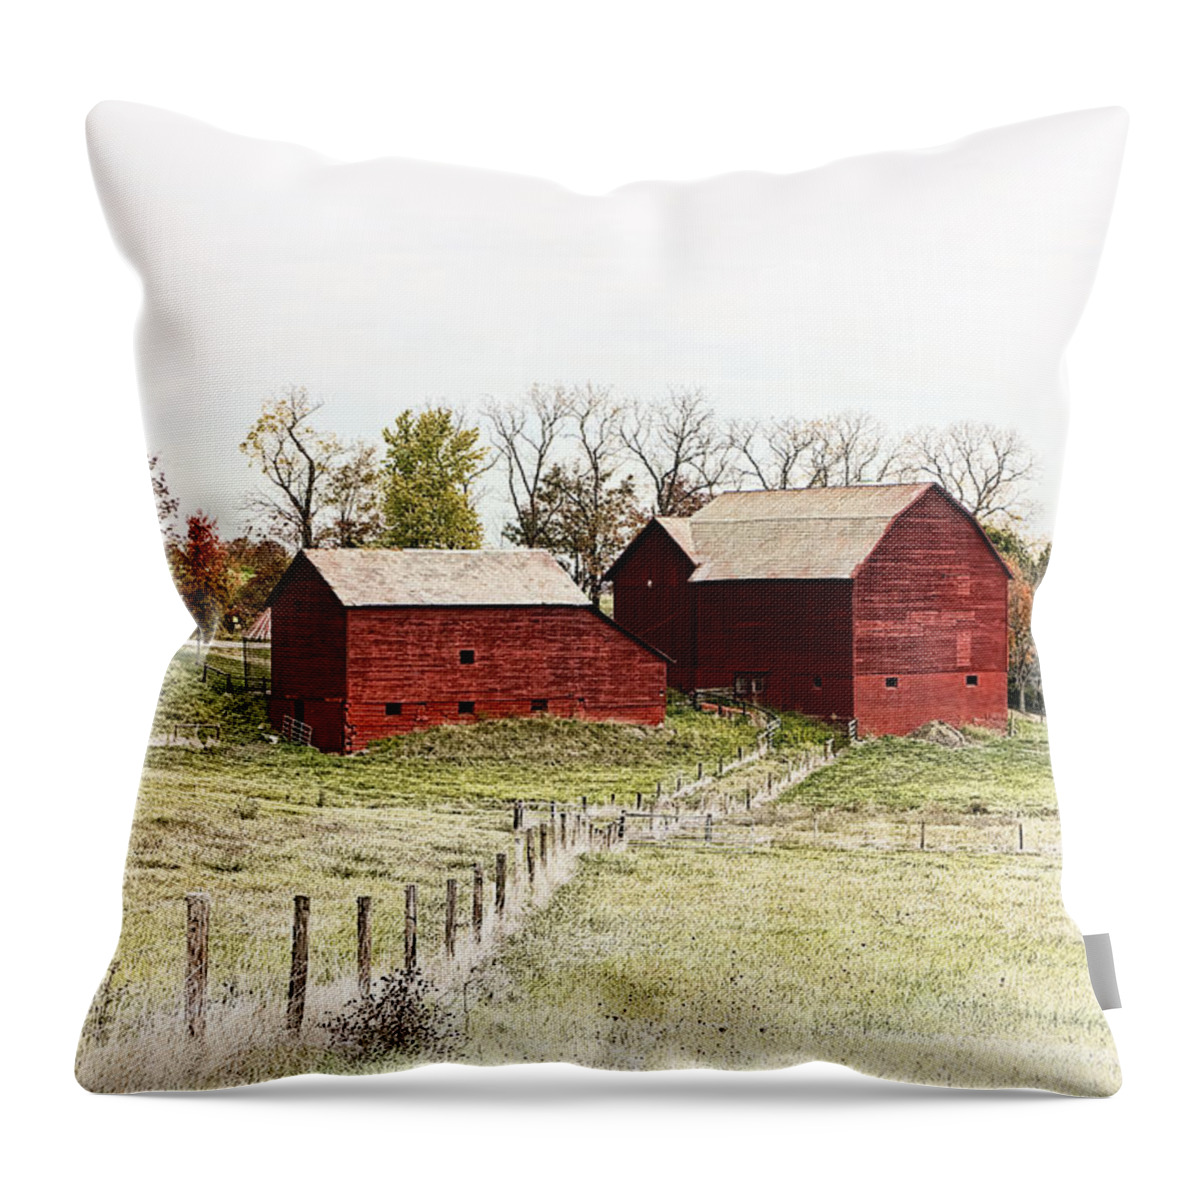 Red Barn Throw Pillow featuring the photograph Red Barn by Marcia Colelli